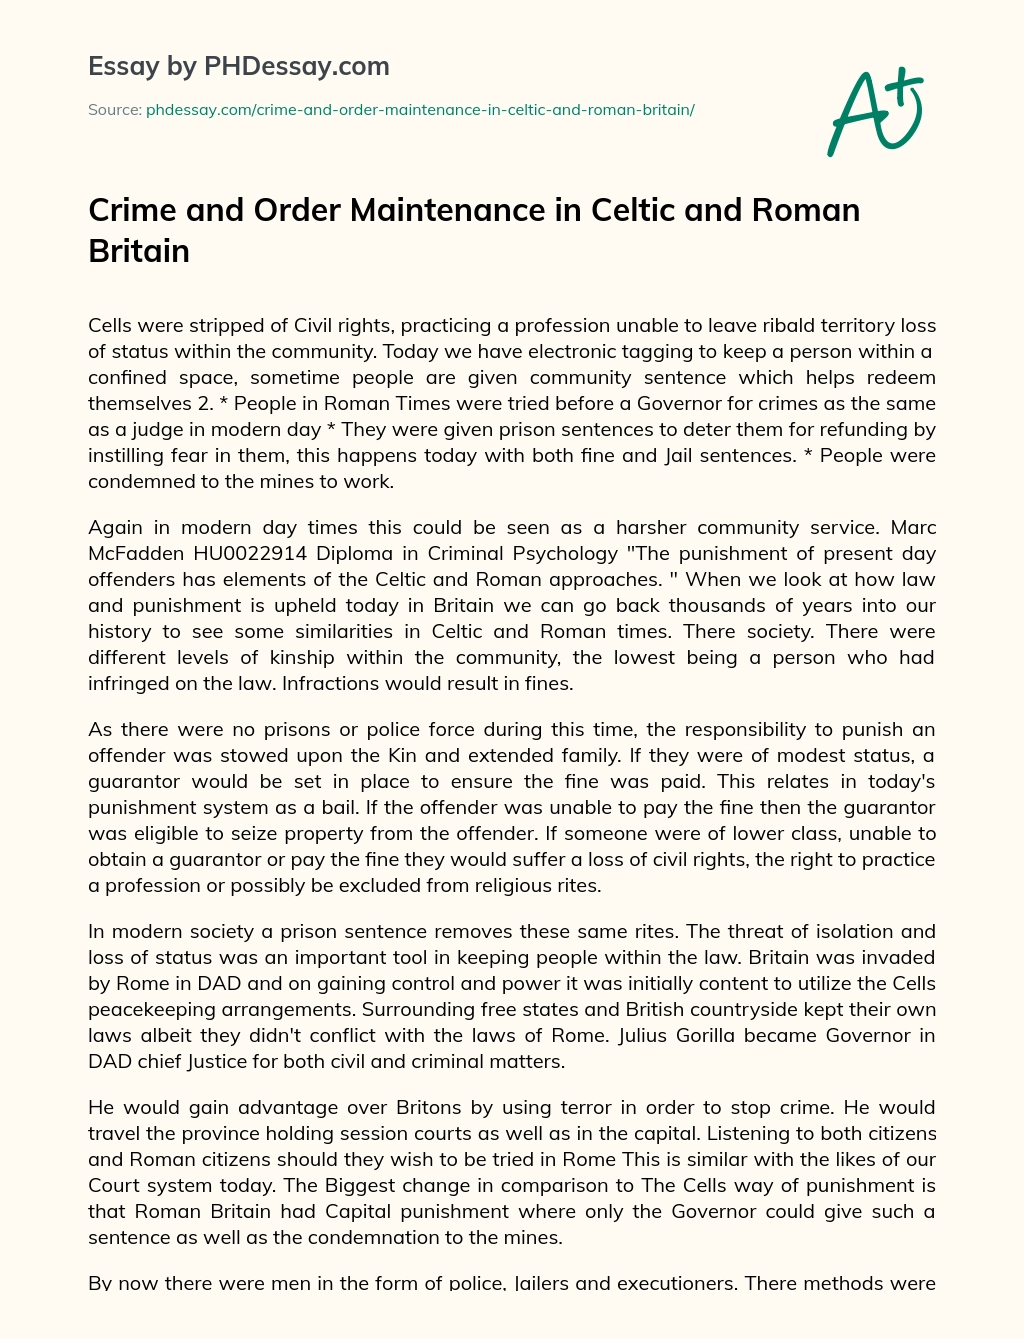 Crime and Order Maintenance in Celtic and Roman Britain essay